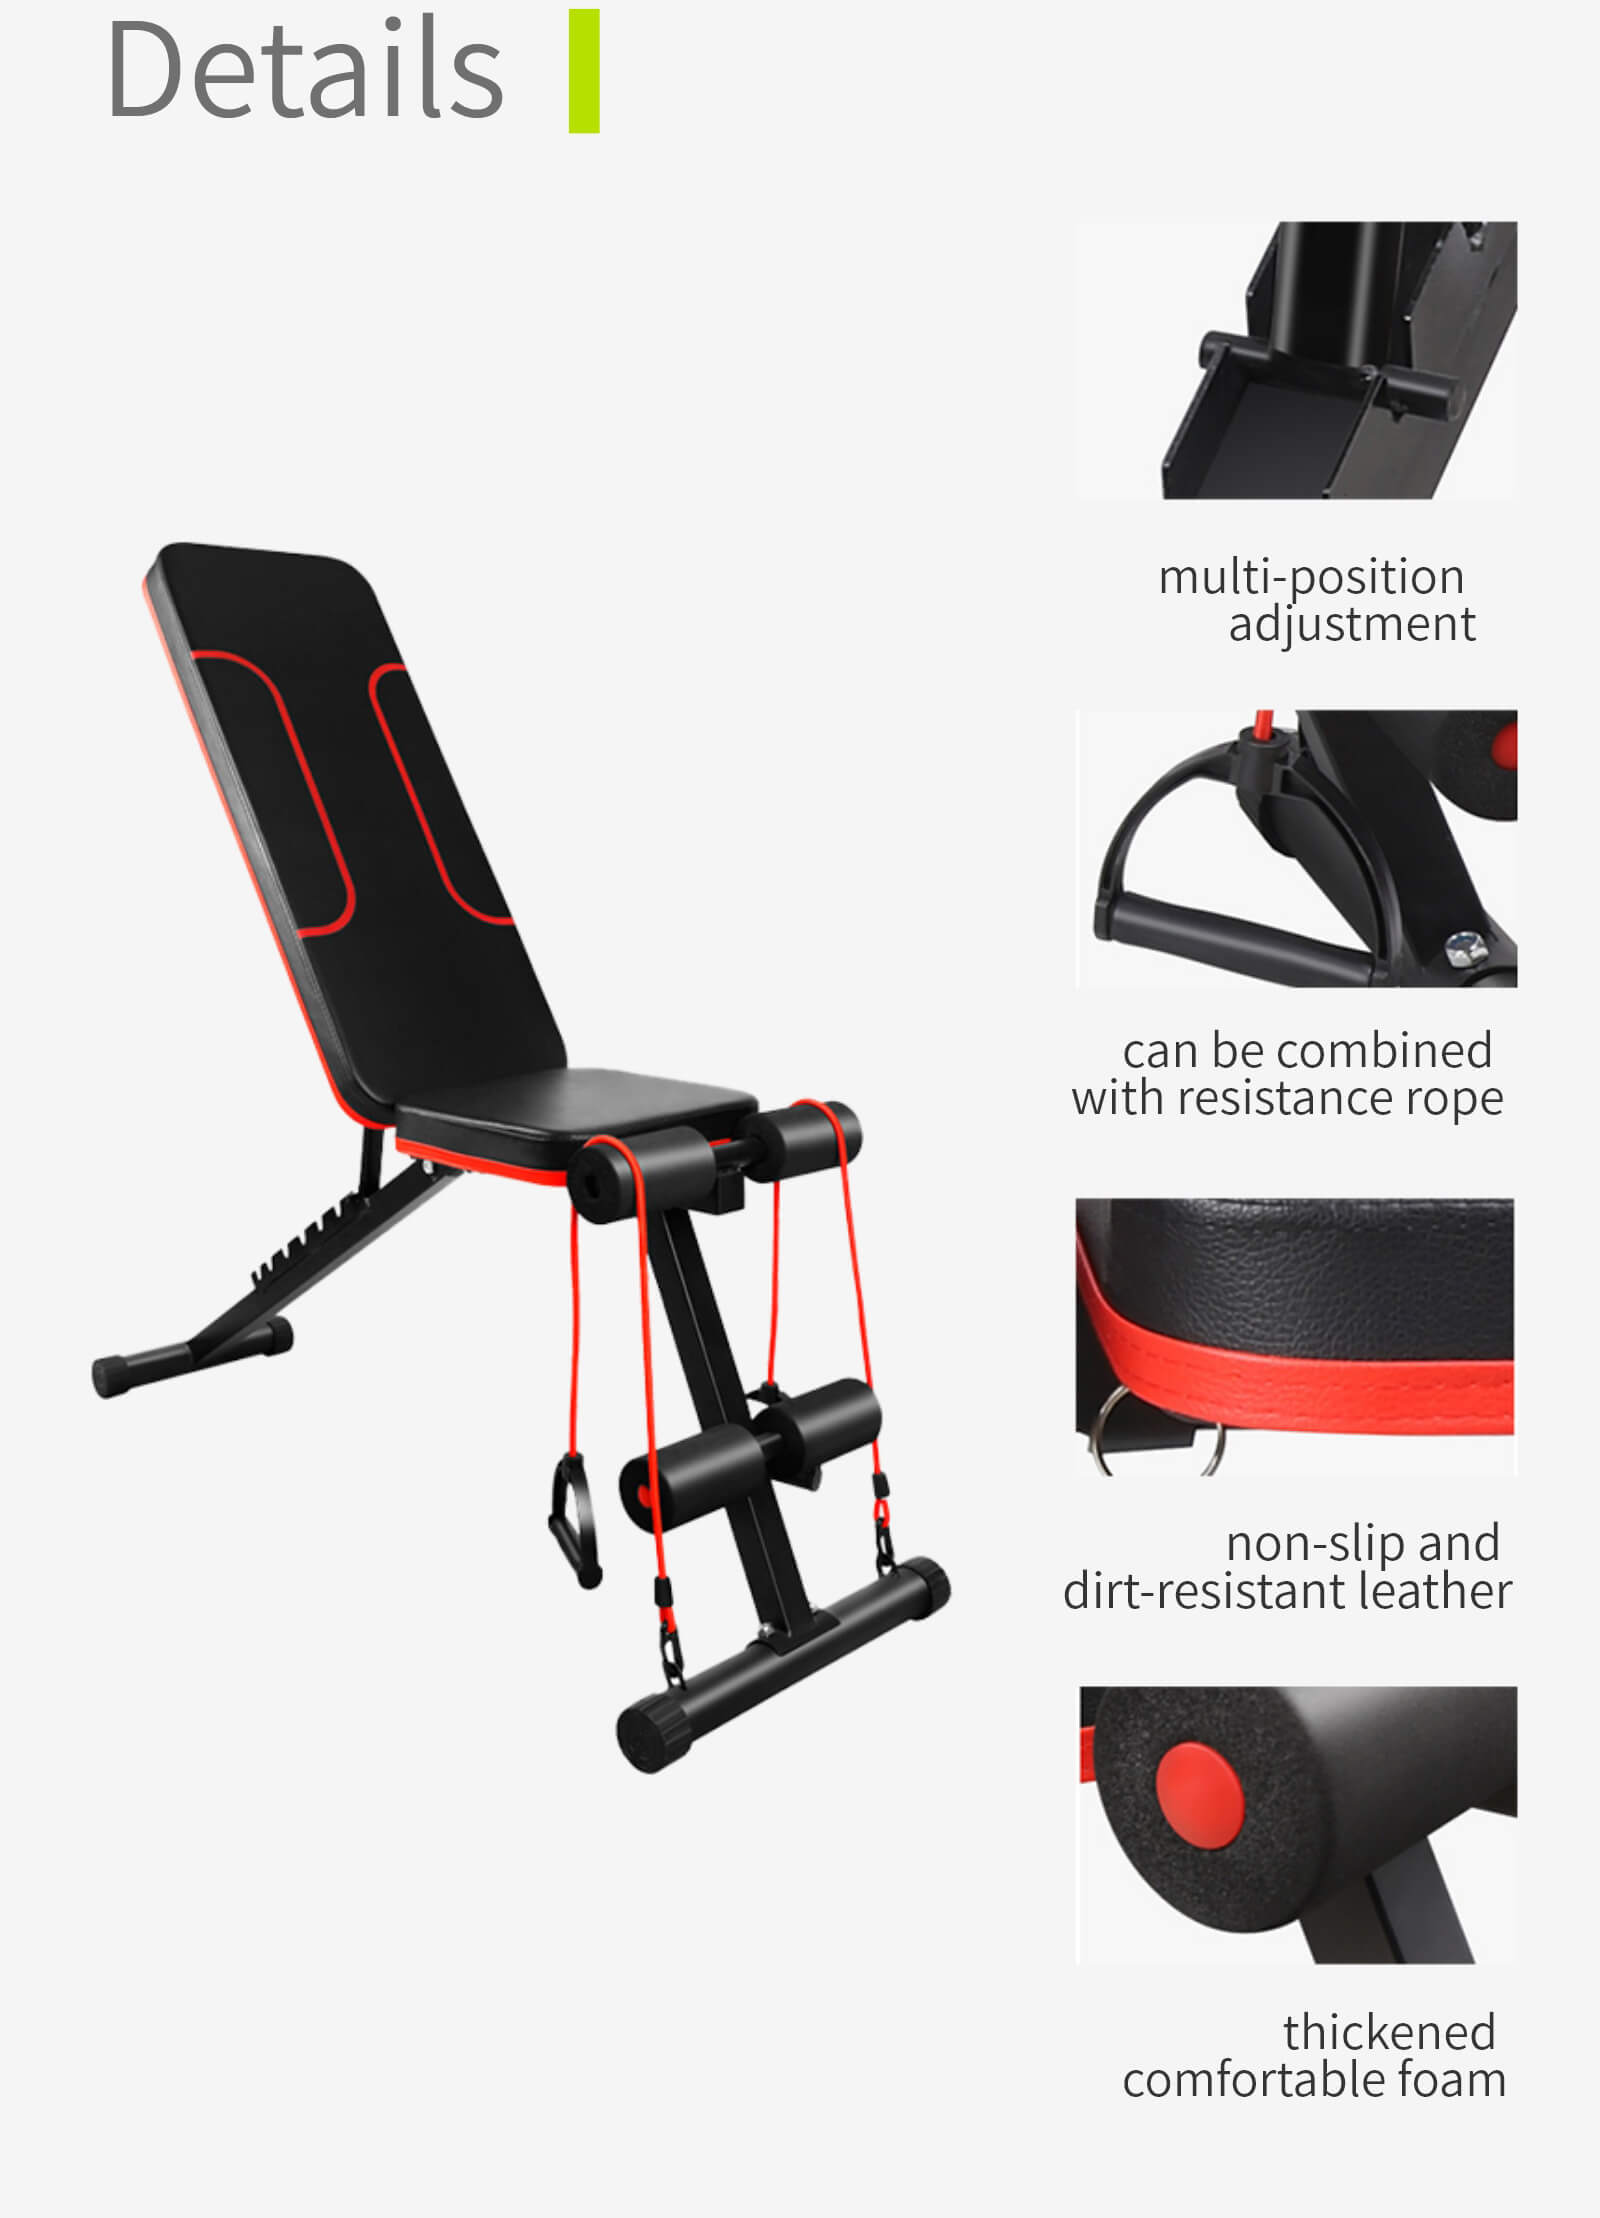 Foldable Workout Bench